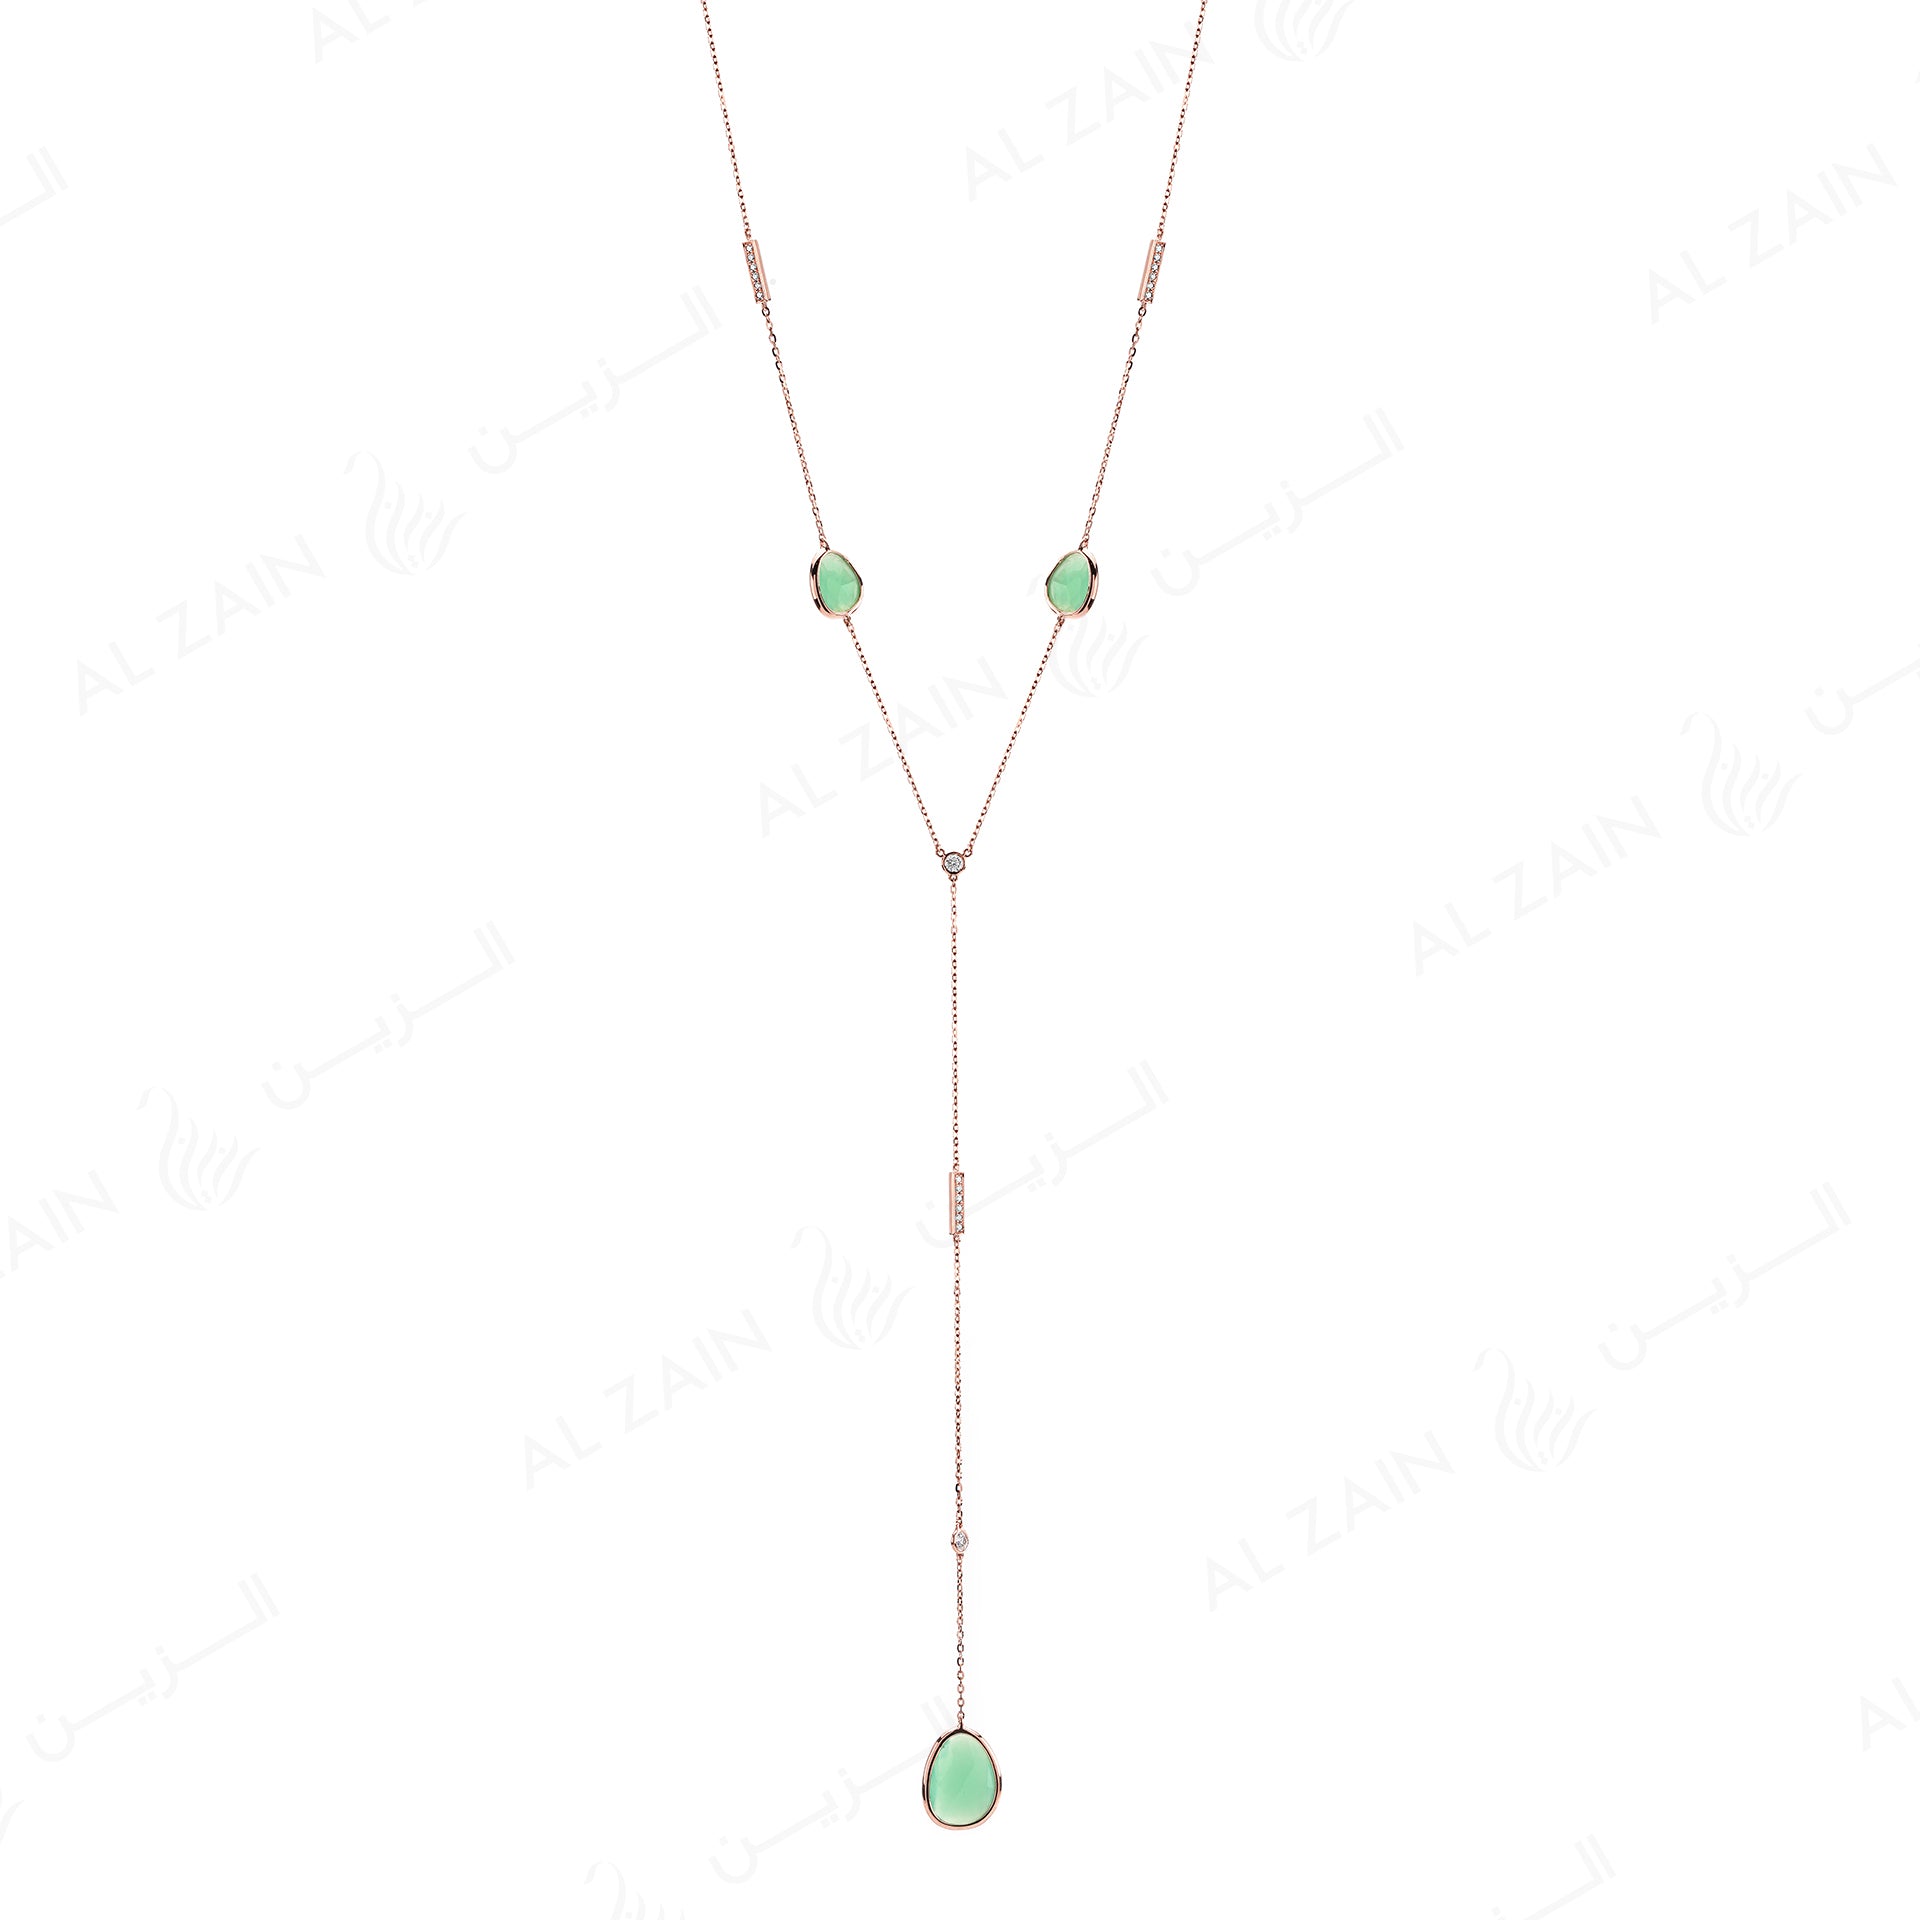 Simply Nina necklace in 18k rose gold with Chrysoprase stones and diamonds